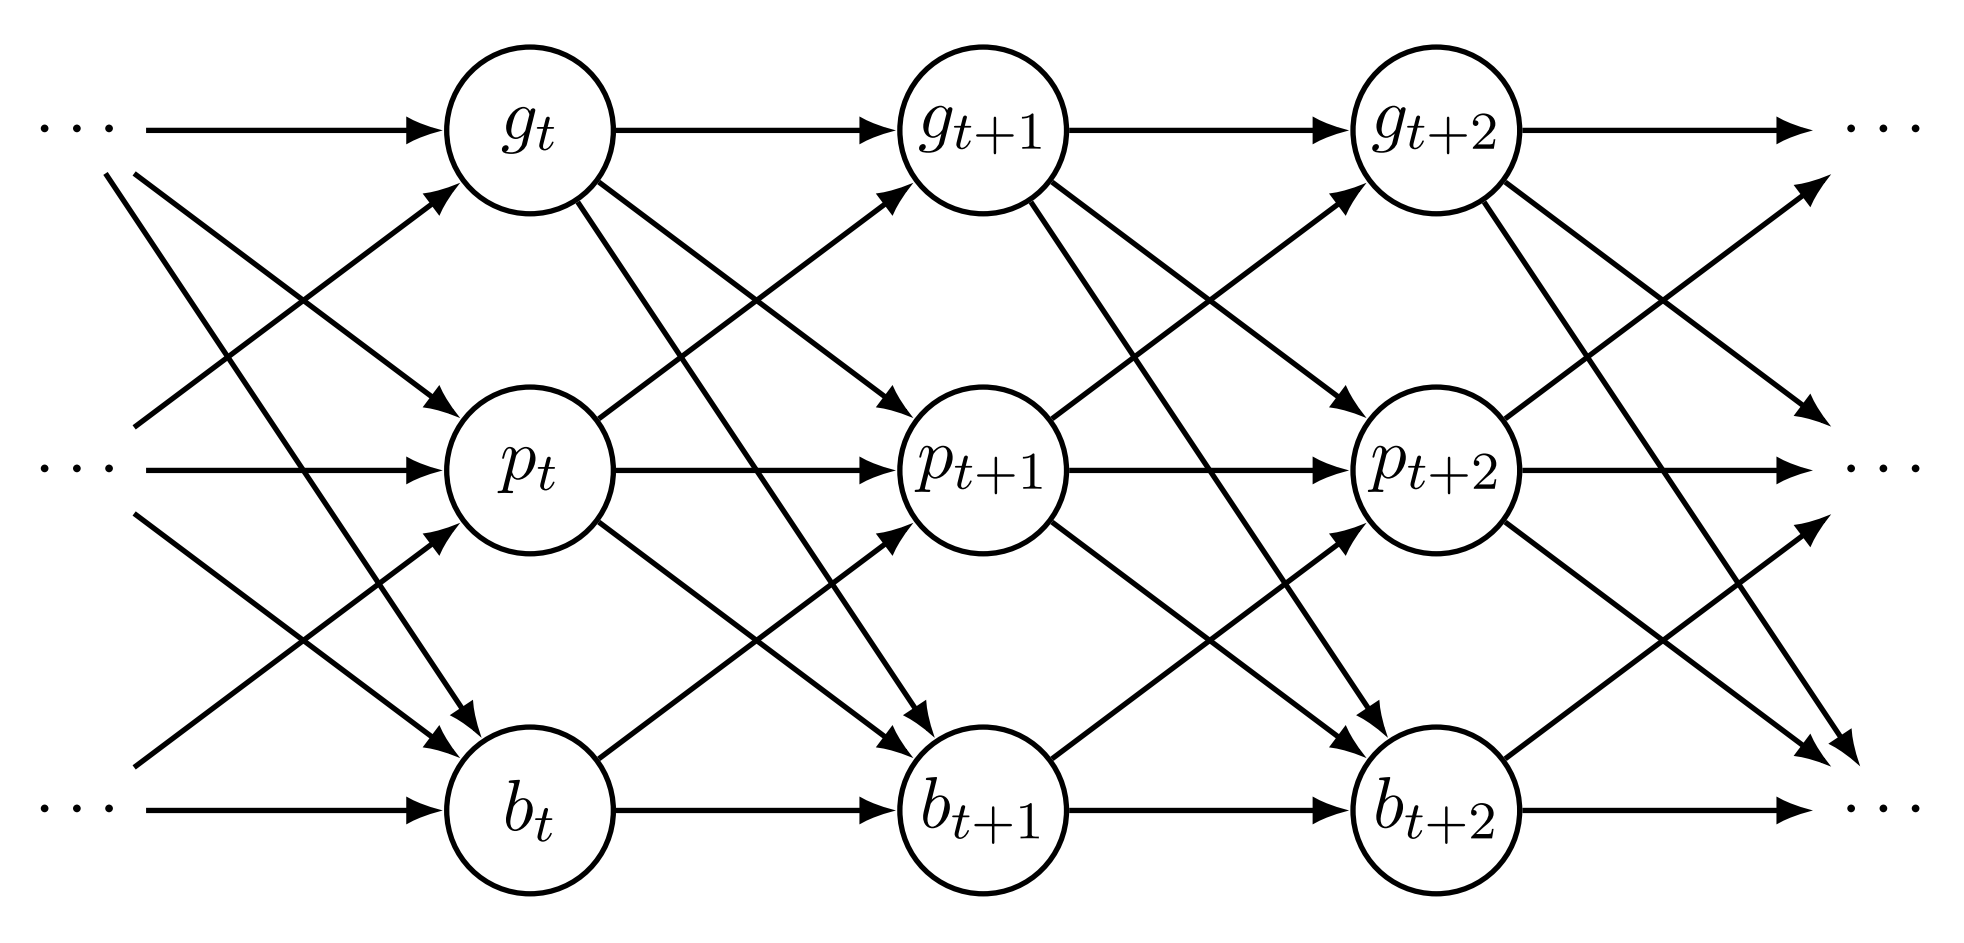  A directed acyclic graph for the multichannel model with arrows corresponding to the assumed direct causal effects. A cross-section at times t, t+1, and t+2 is shown. The nodes corresponding to the deterministic tranformation \log(p_t) are omitted for clarity.